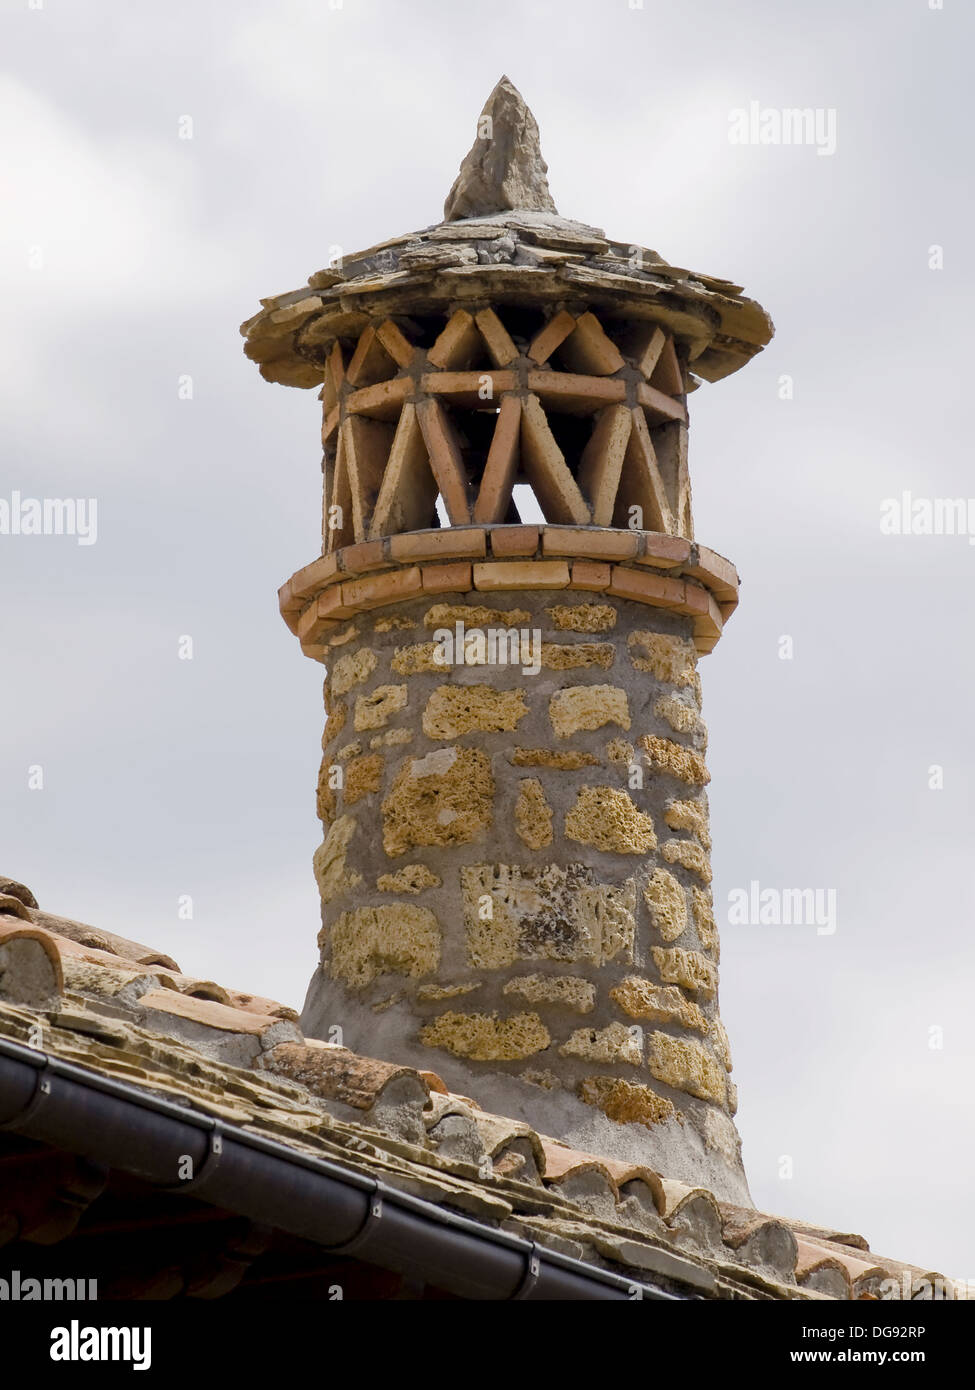 Chimenera High Resolution Stock Photography and Images - Alamy